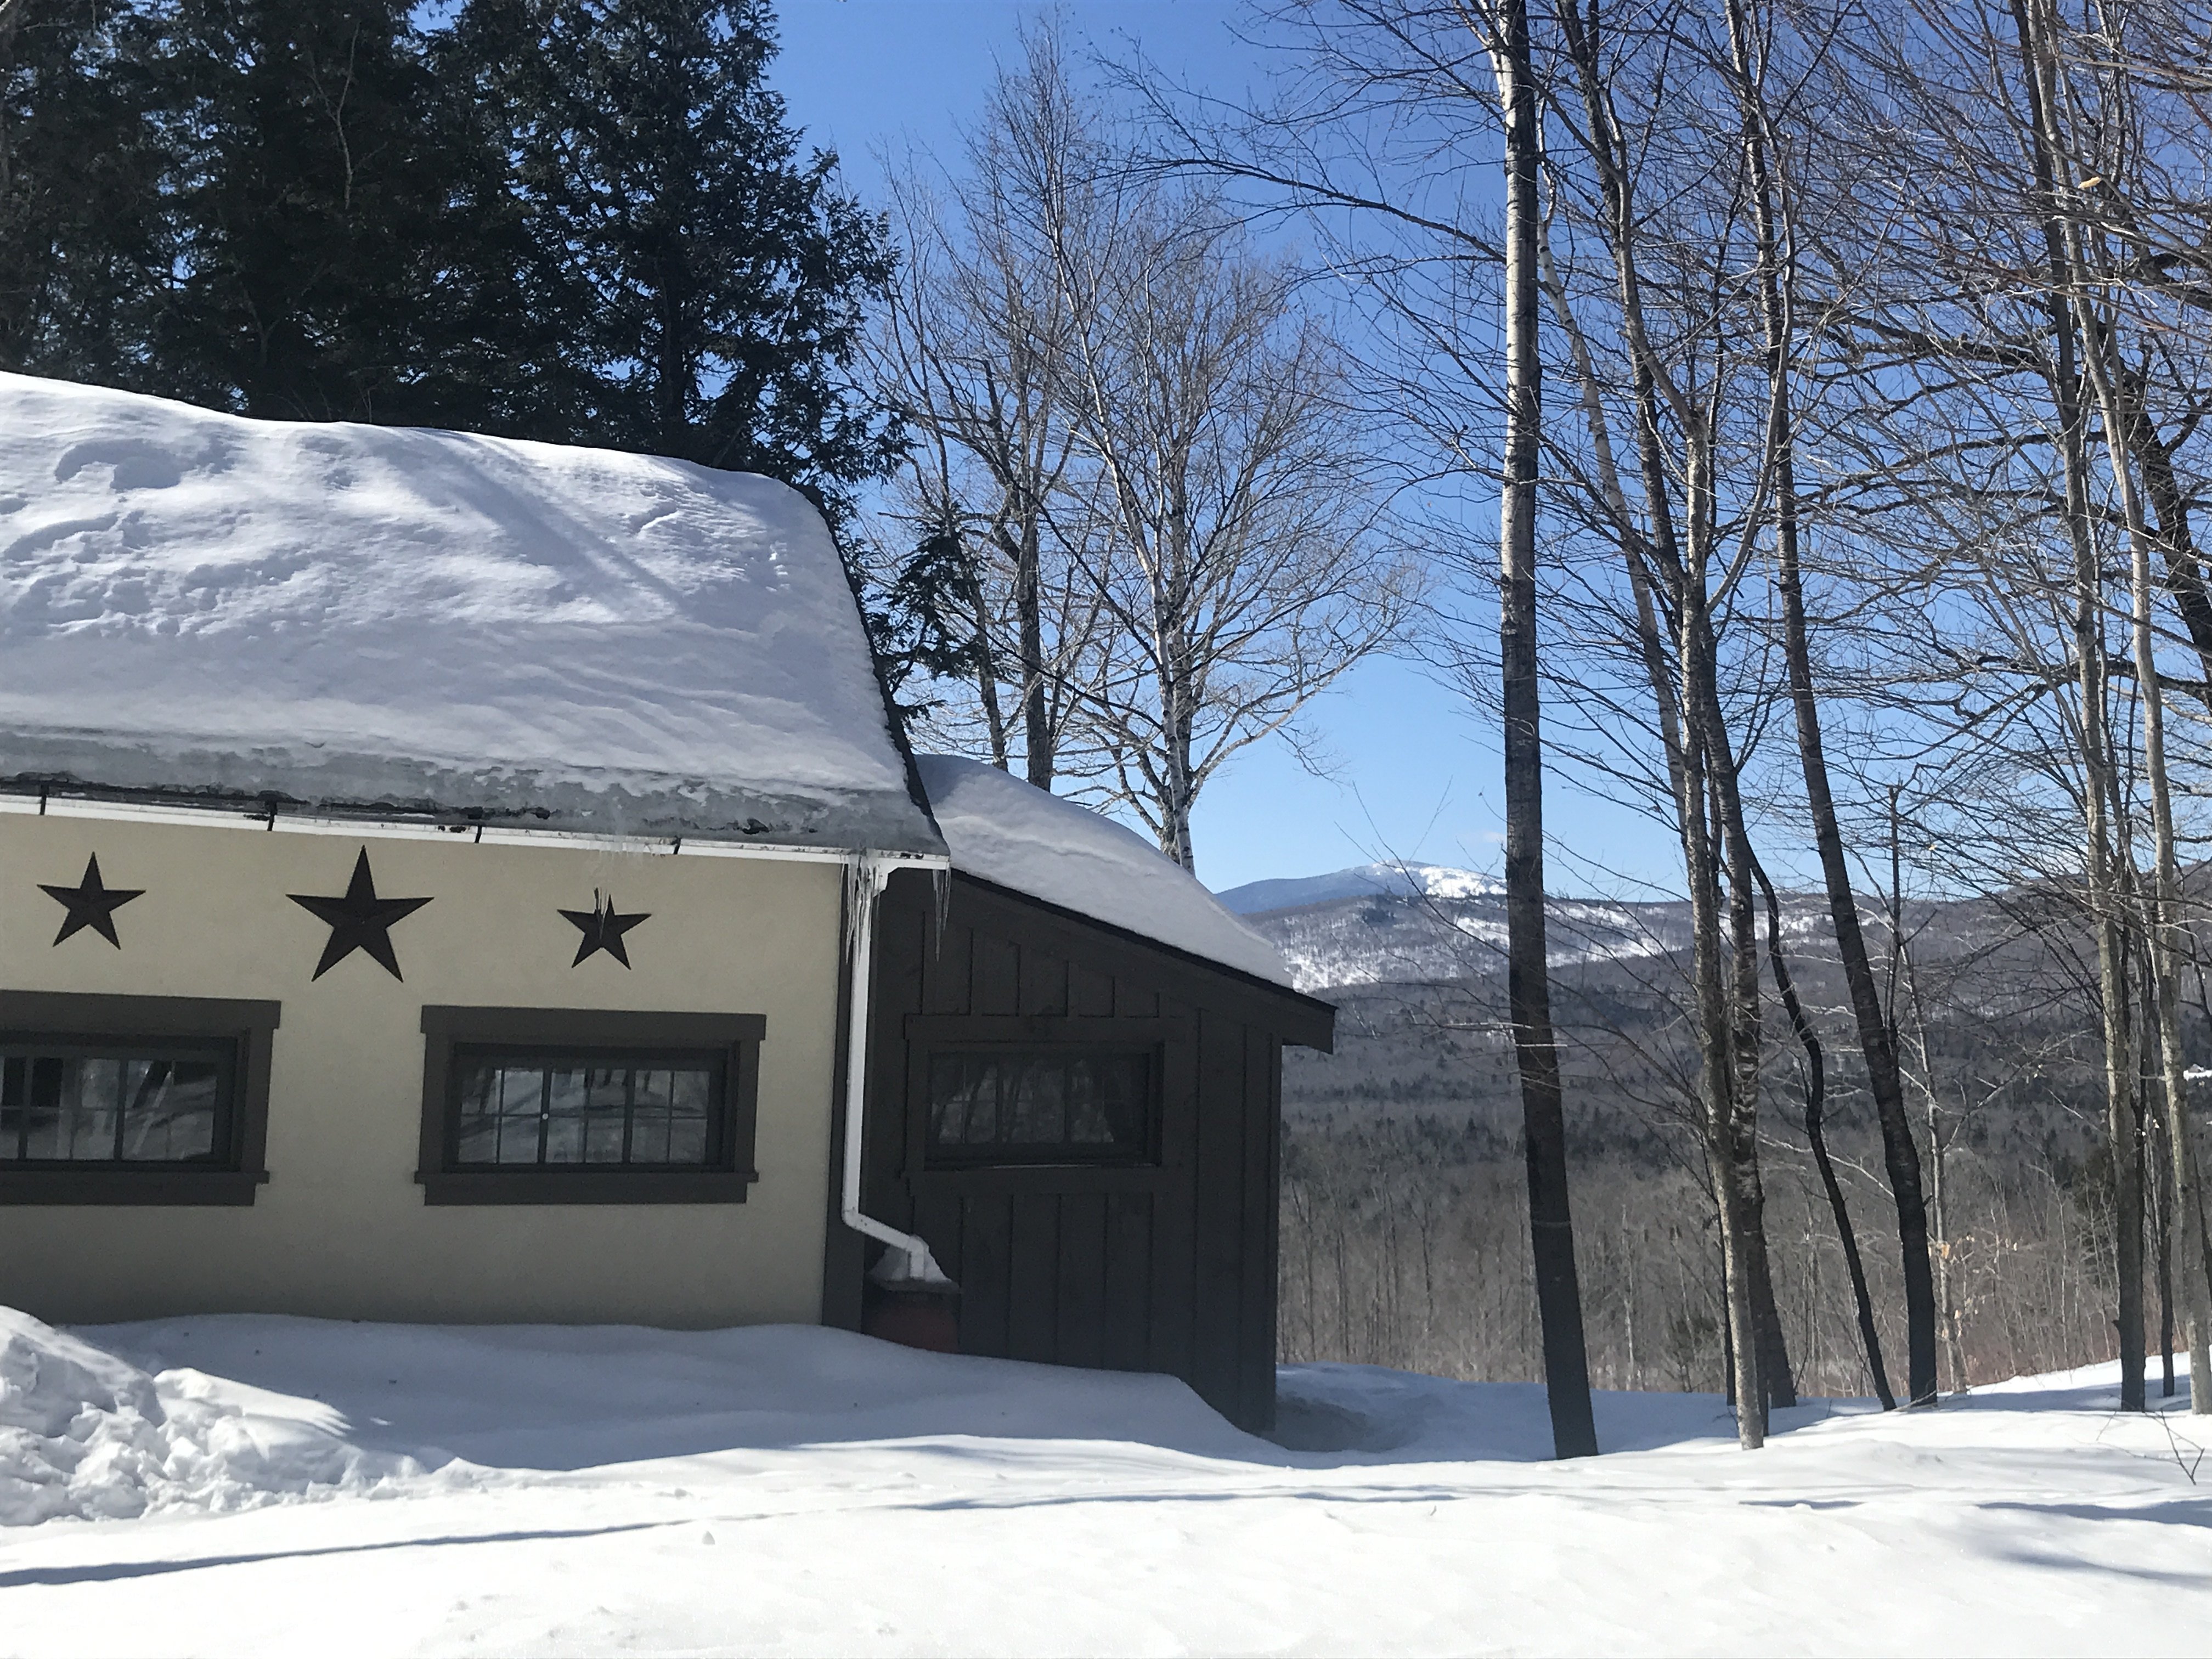 The Most Relaxing Cabin in Maine